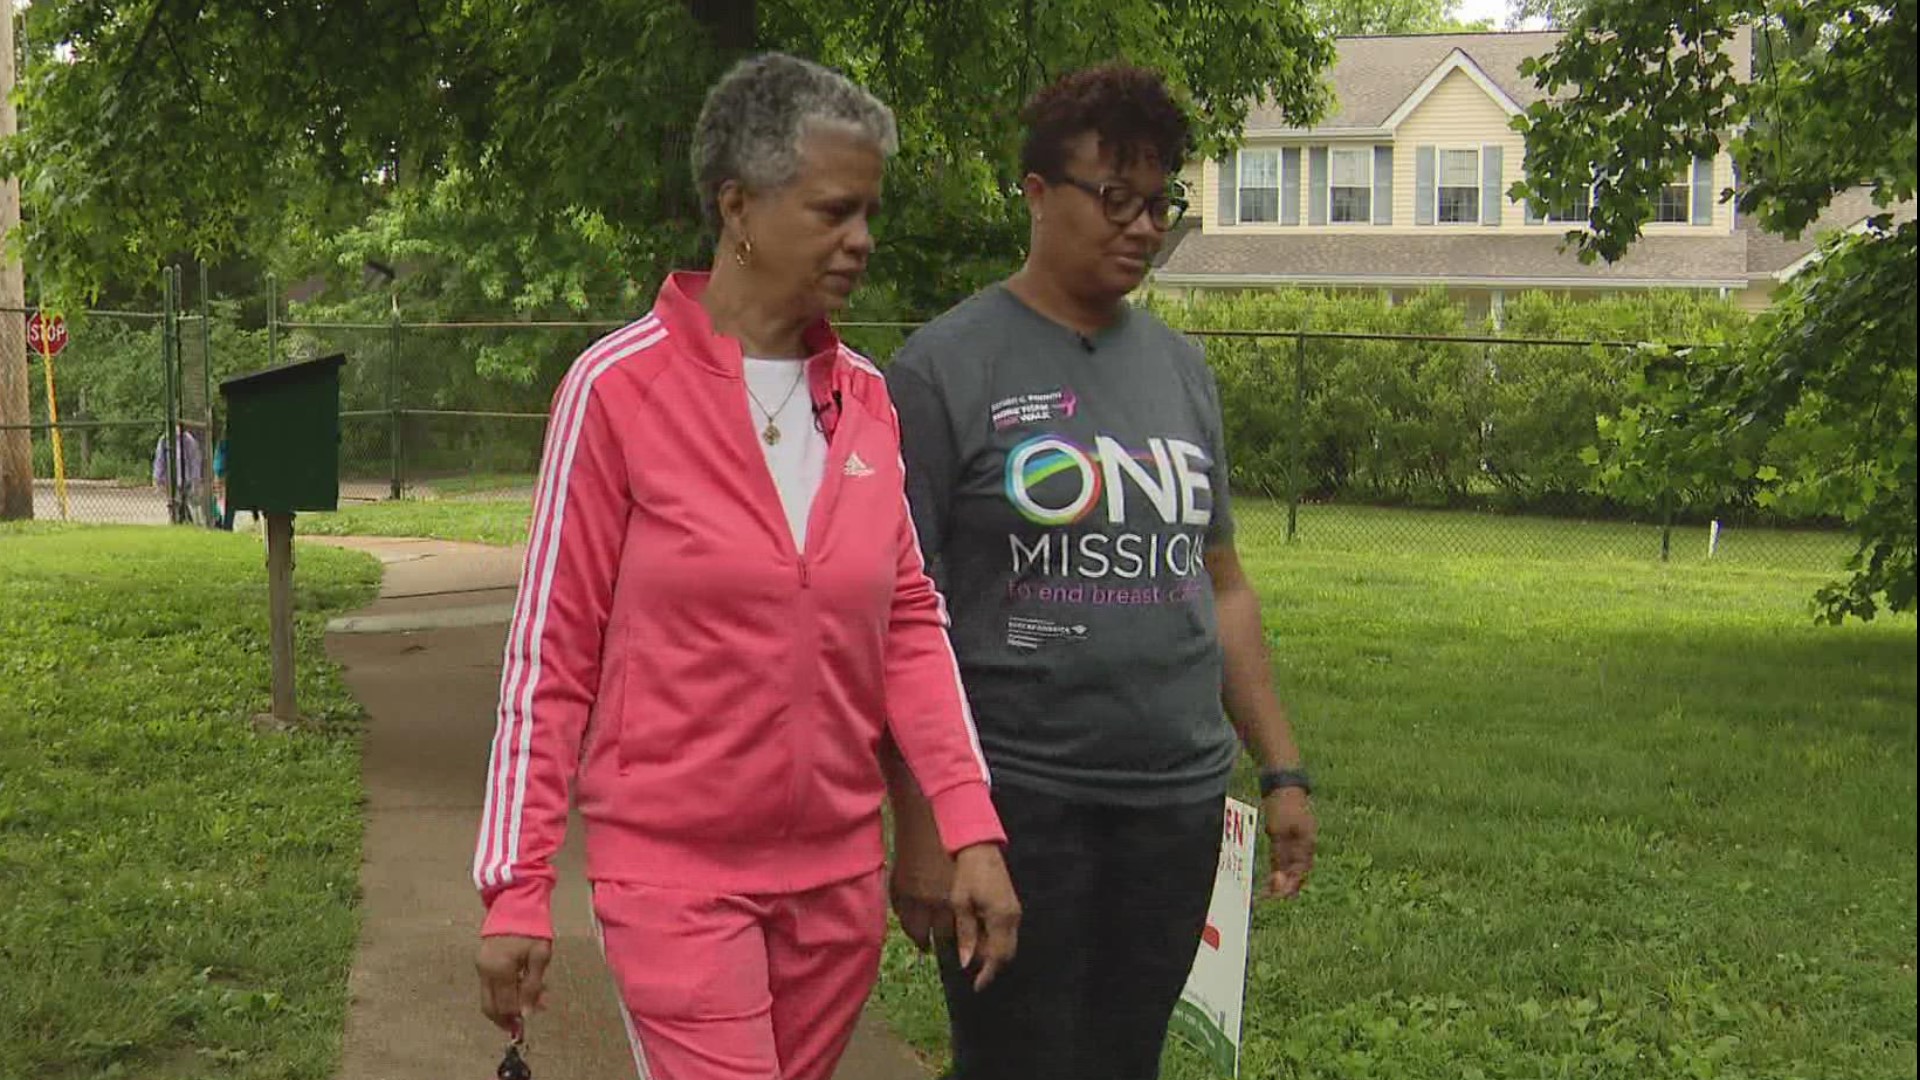 Survivors and loved ones from all over the region will join the race to raise awareness this weekend. Two of them are Melissa Jones and her mom, Linda Shead.